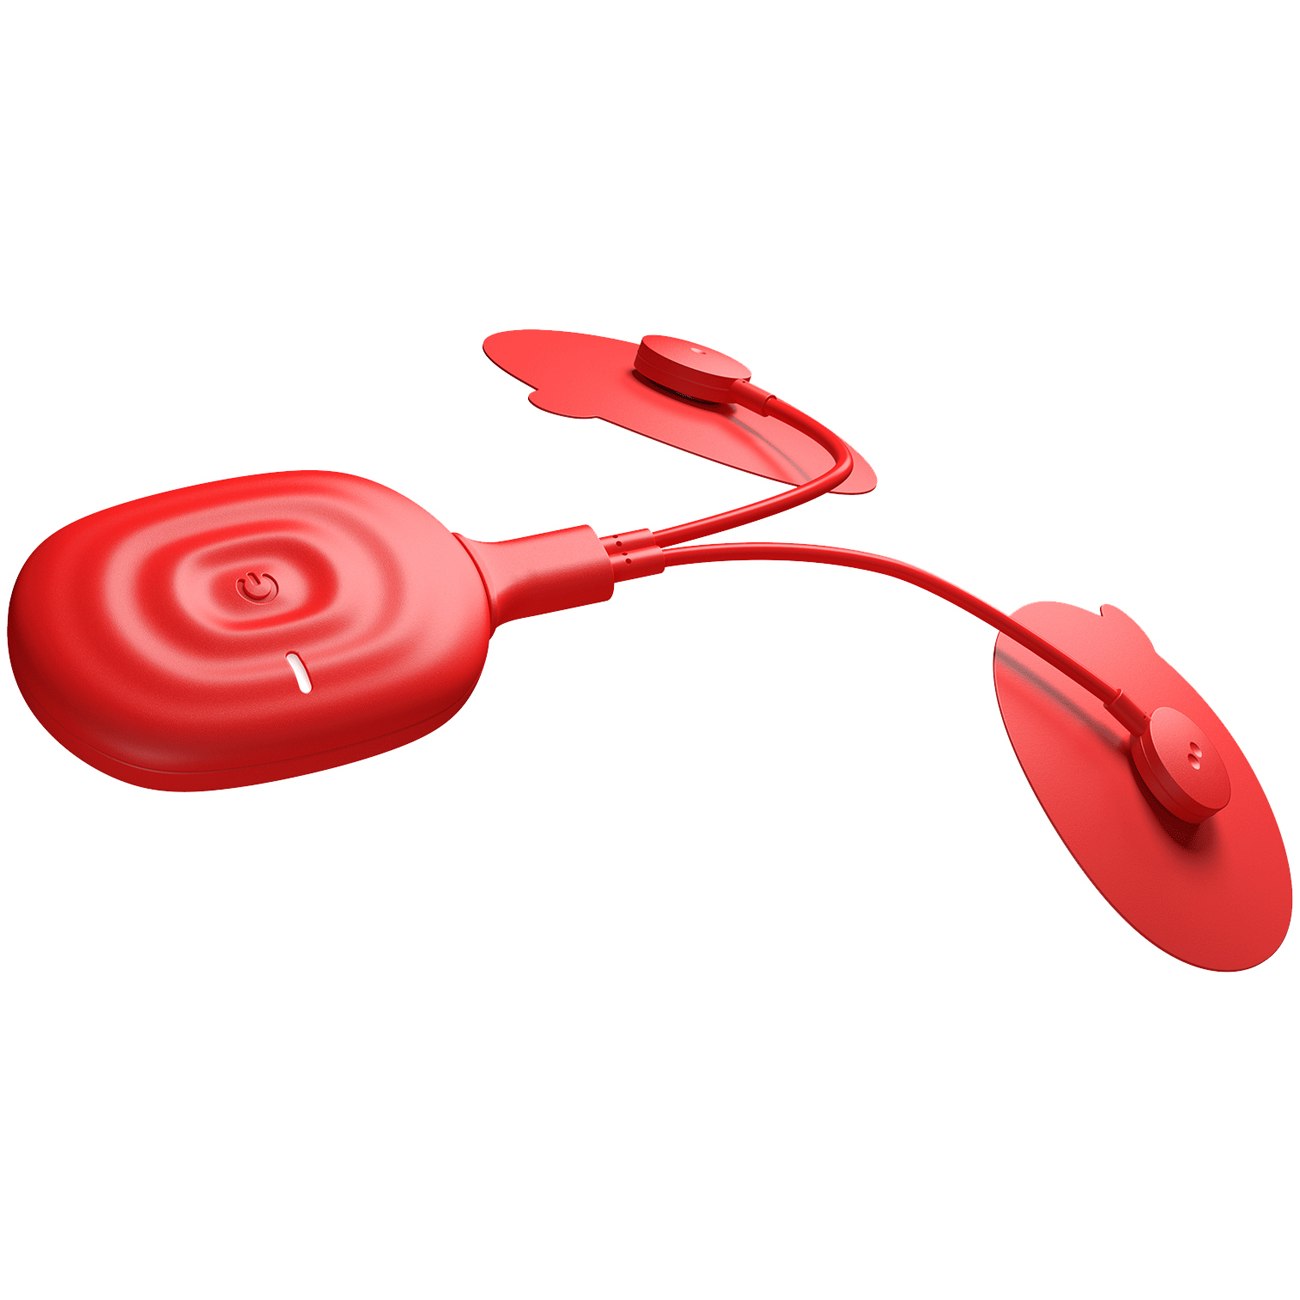 Picture of Powerdot Uno 2.0 Muscle Stimulation - red